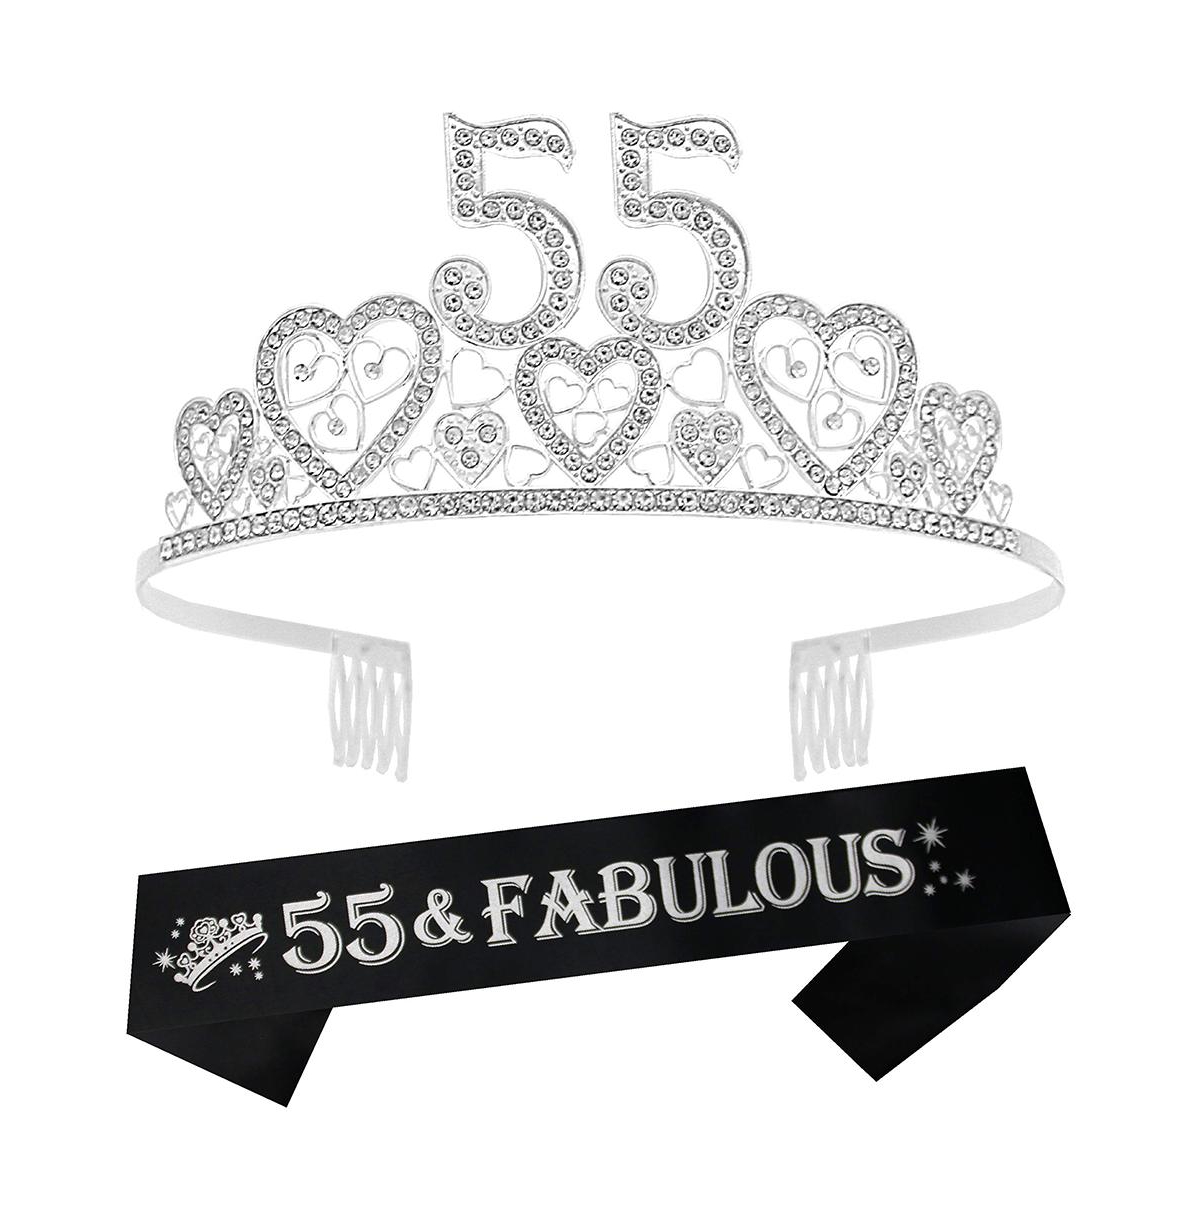 55th Birthday Sash and Tiara for Women - Perfect for Birthday Party and Gifts - Silver